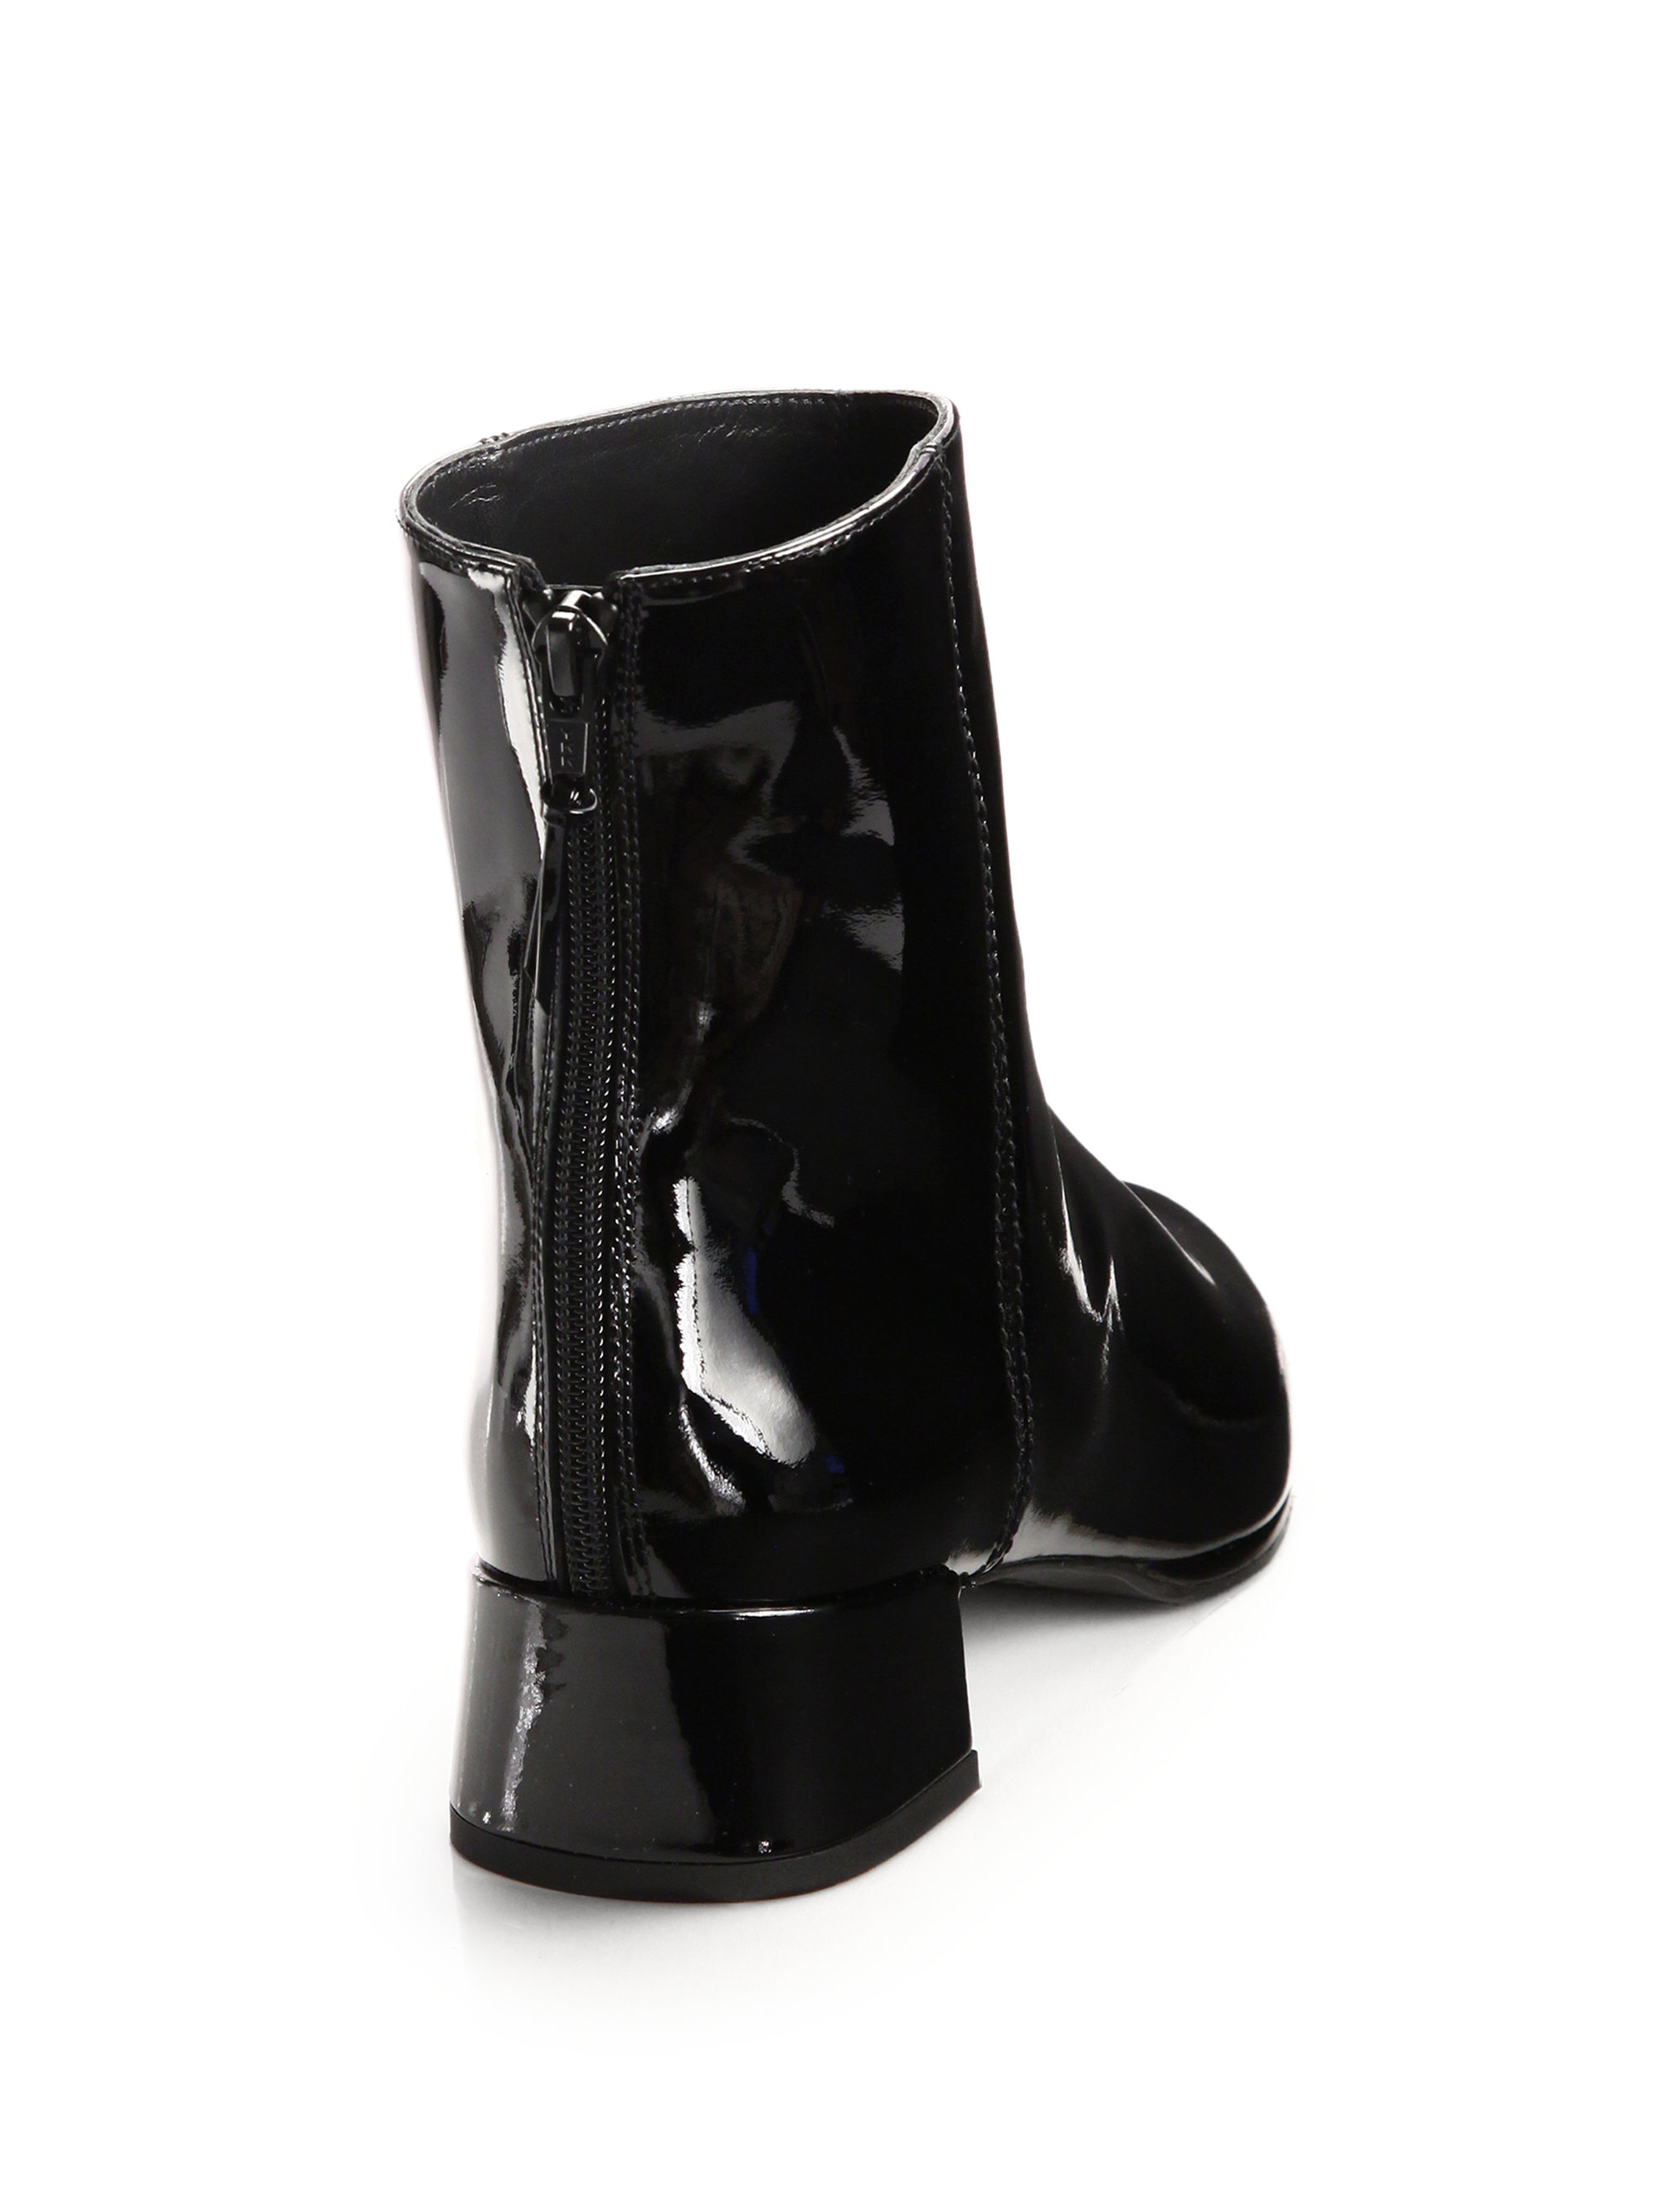 Stuart weitzman Patent Leather Ankle Boots in Black | Lyst